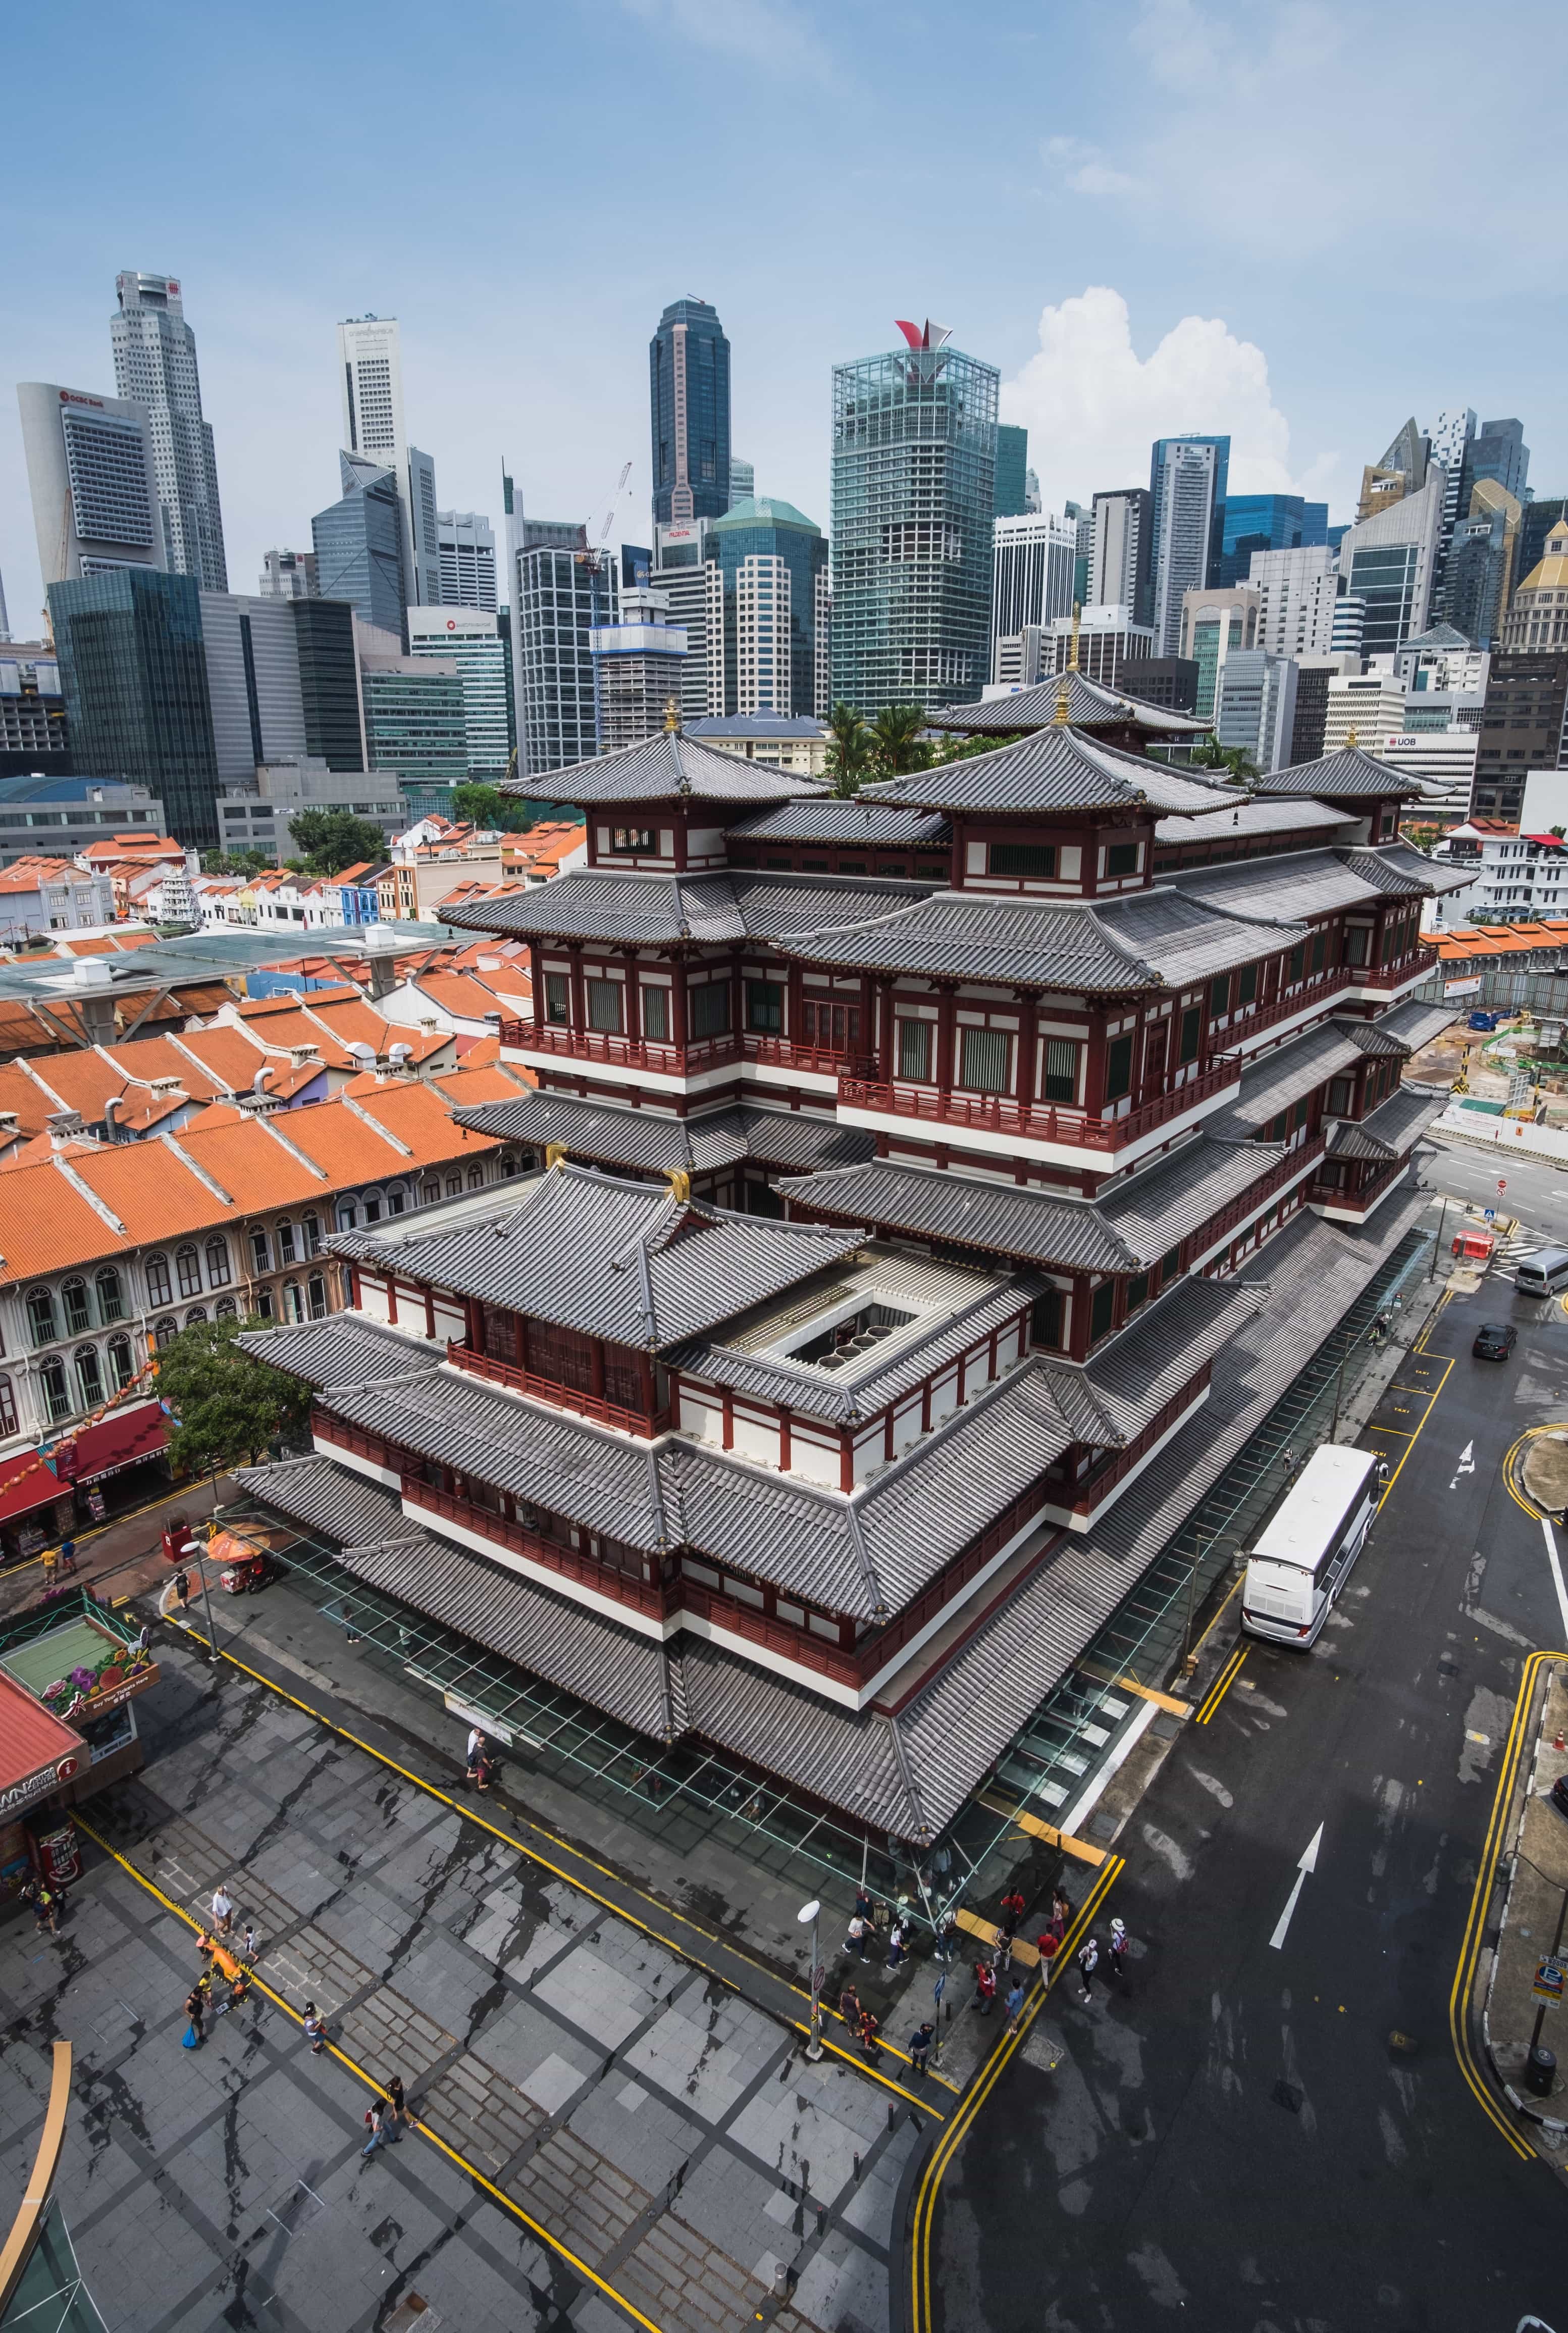 Singapore tourist spots, Buddha Tooth Relic Temple